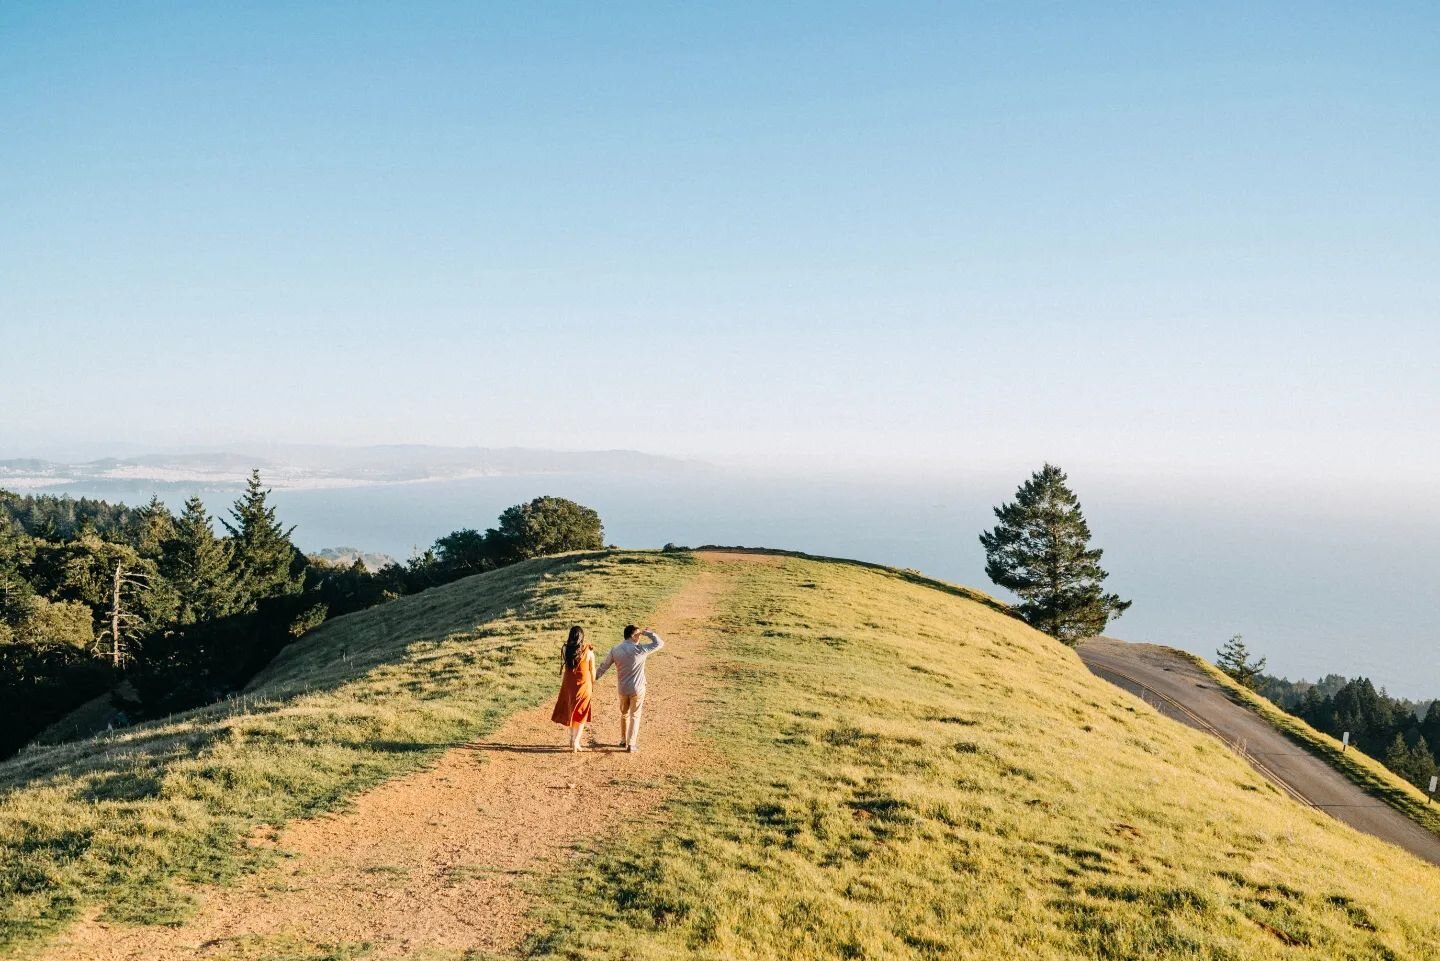 Allison + Rei at Mt Tam ✨.

Long and twisty roads, but for this view, it's all worth it. We almost had the place to ourselves 😁.

More to come soon.
.
.
.
.
.
.
#tellon #somewheremagazine #imaginarymagnitude #stayandwander #thedreamersplace #dreamer